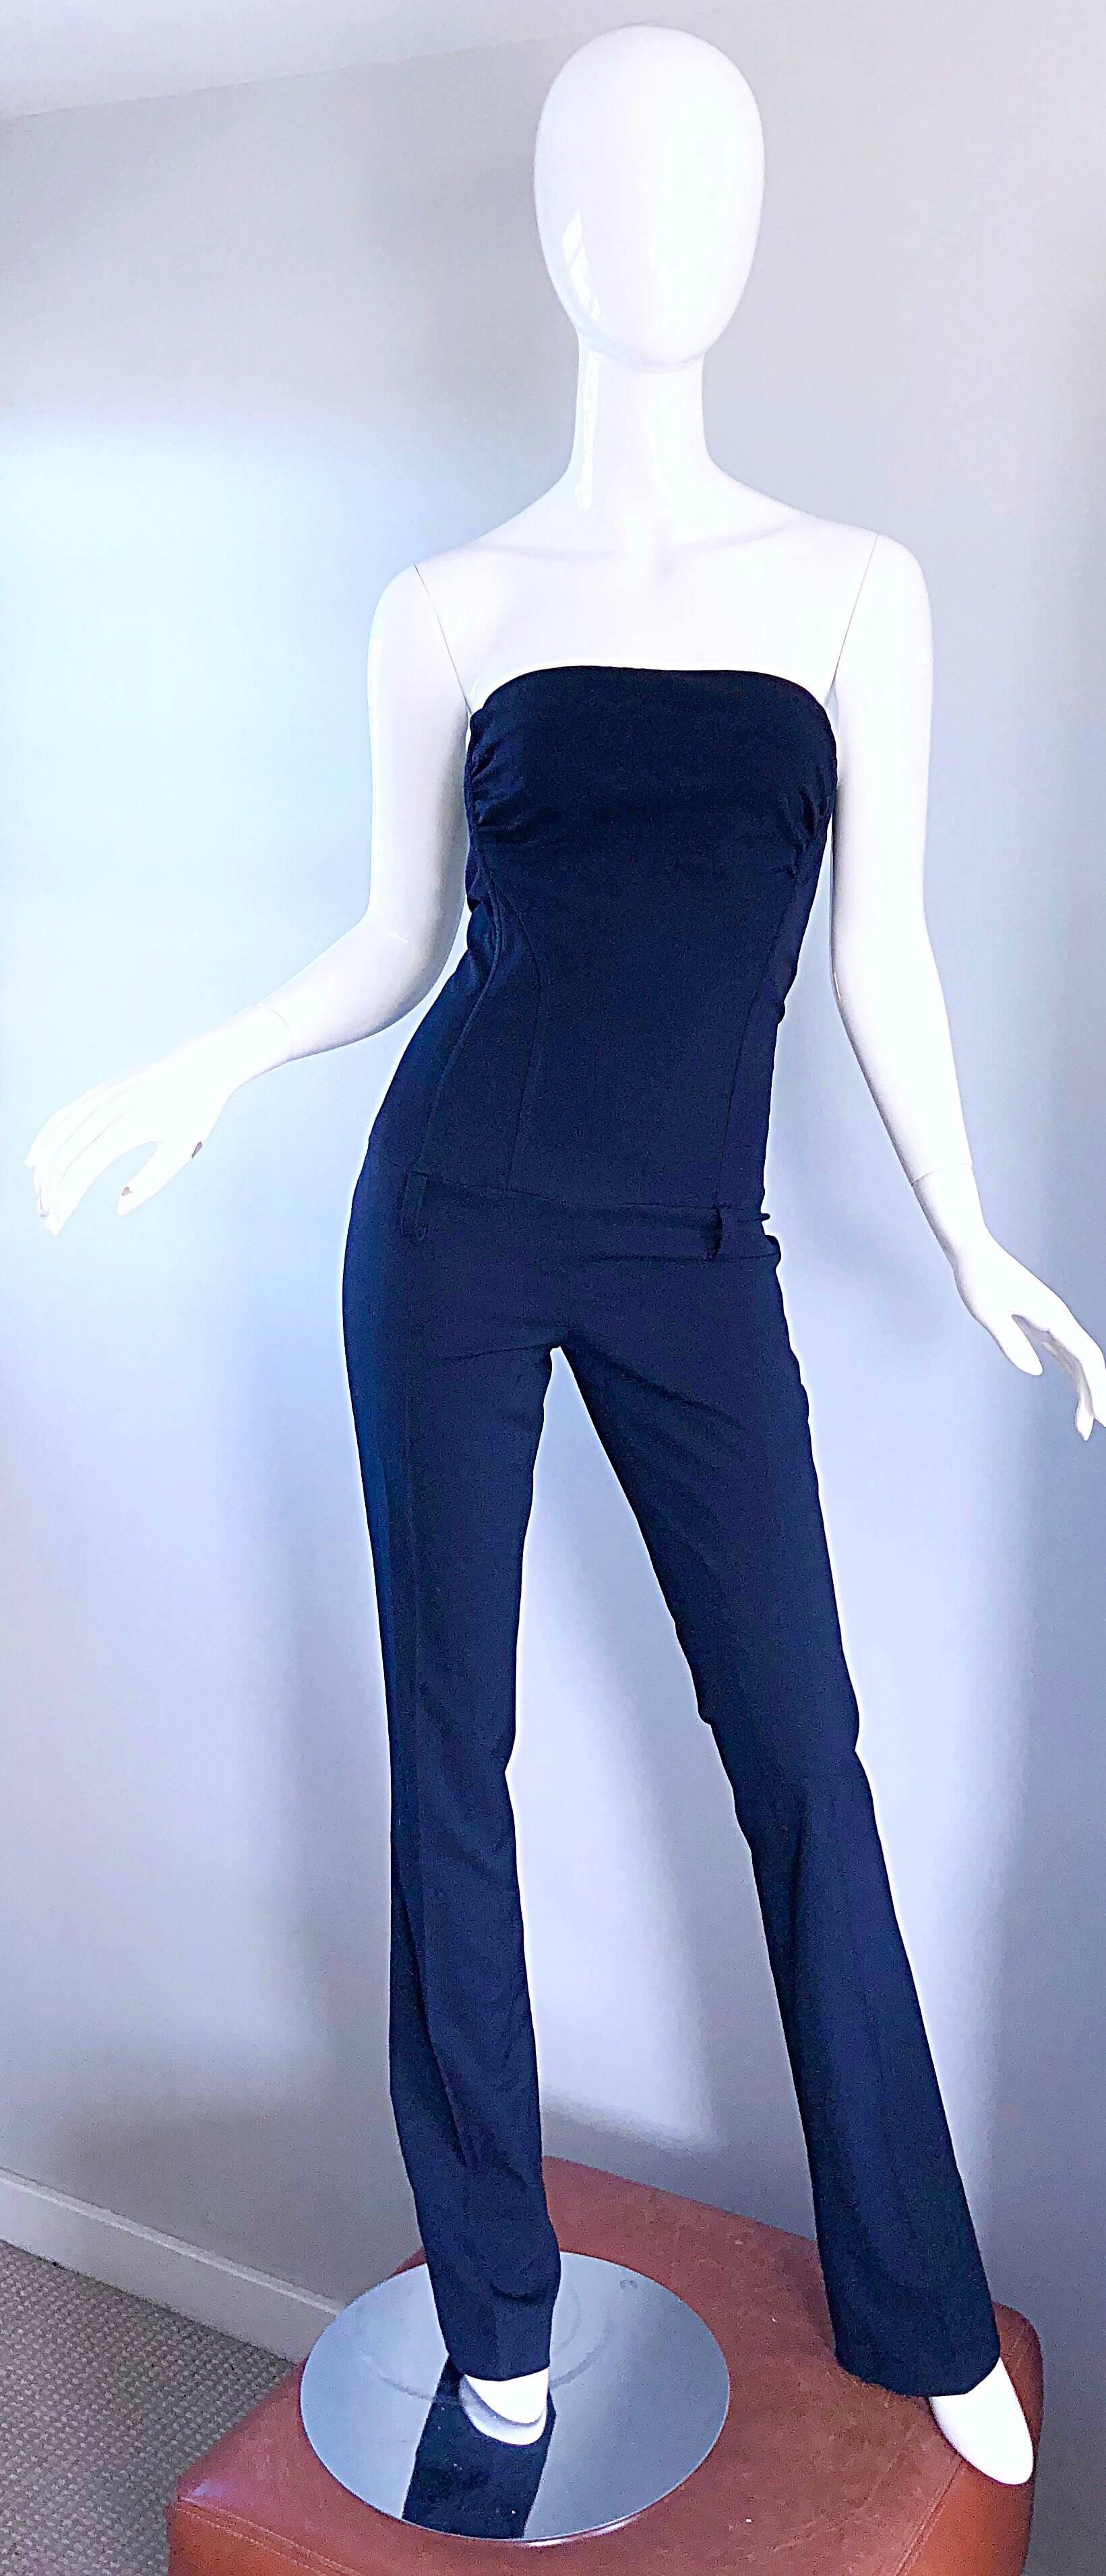 Fantastic early 2000s ELISABETTA FRANCHI Per CELYN B. Navy blue strapless jumpsuit! Features a soft virgin wool and rayon blend that allows for just the right amount of stretch and comfort. Boned bodice keeps everything in place. Pant legs are